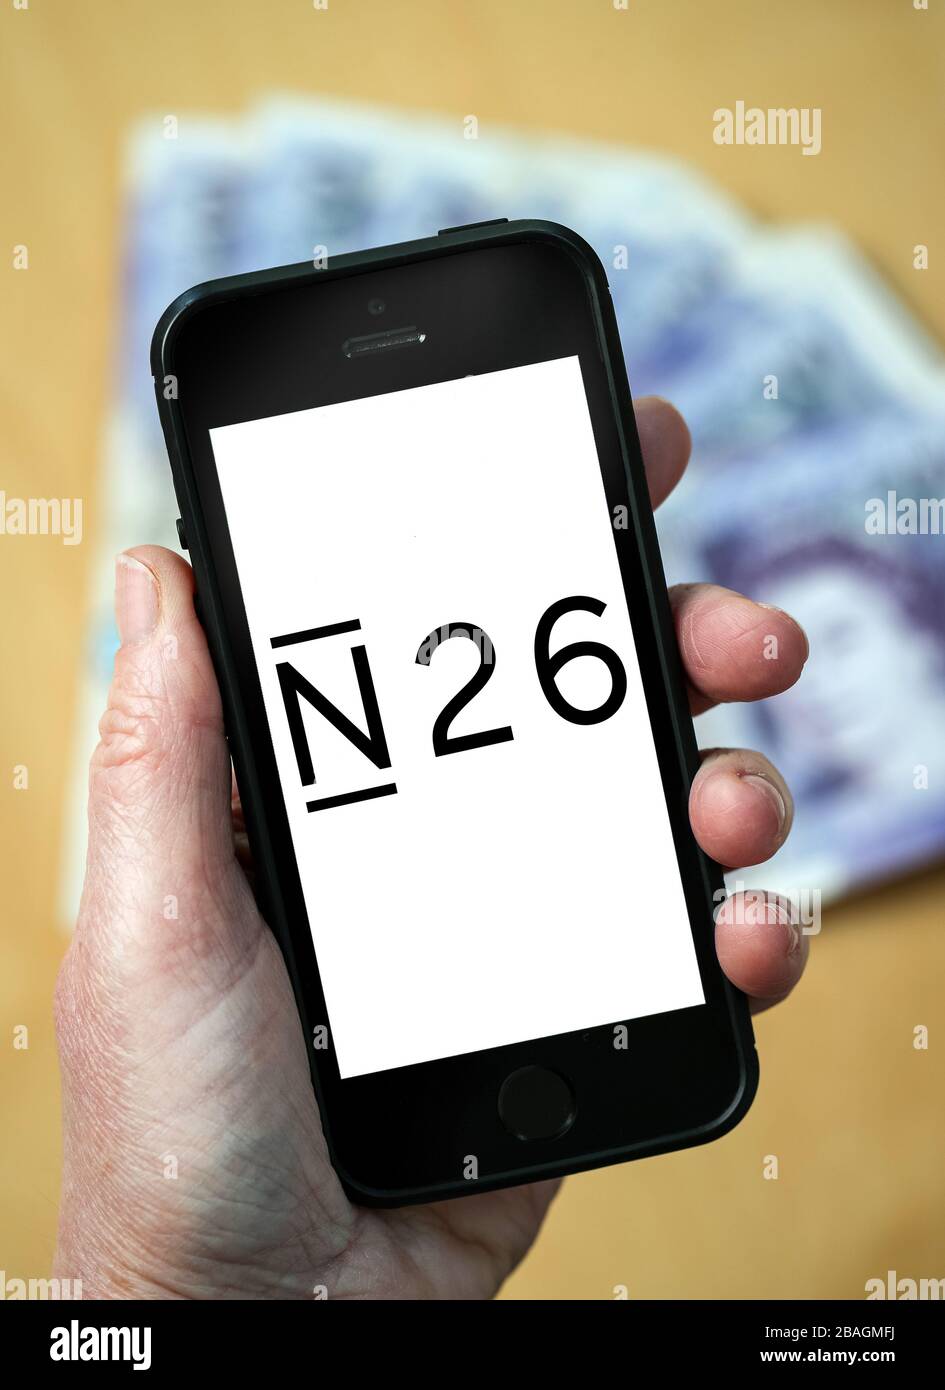 A woman looking at the N26 Bank logo on a mobile phone. (editorial Use Only) Stock Photo